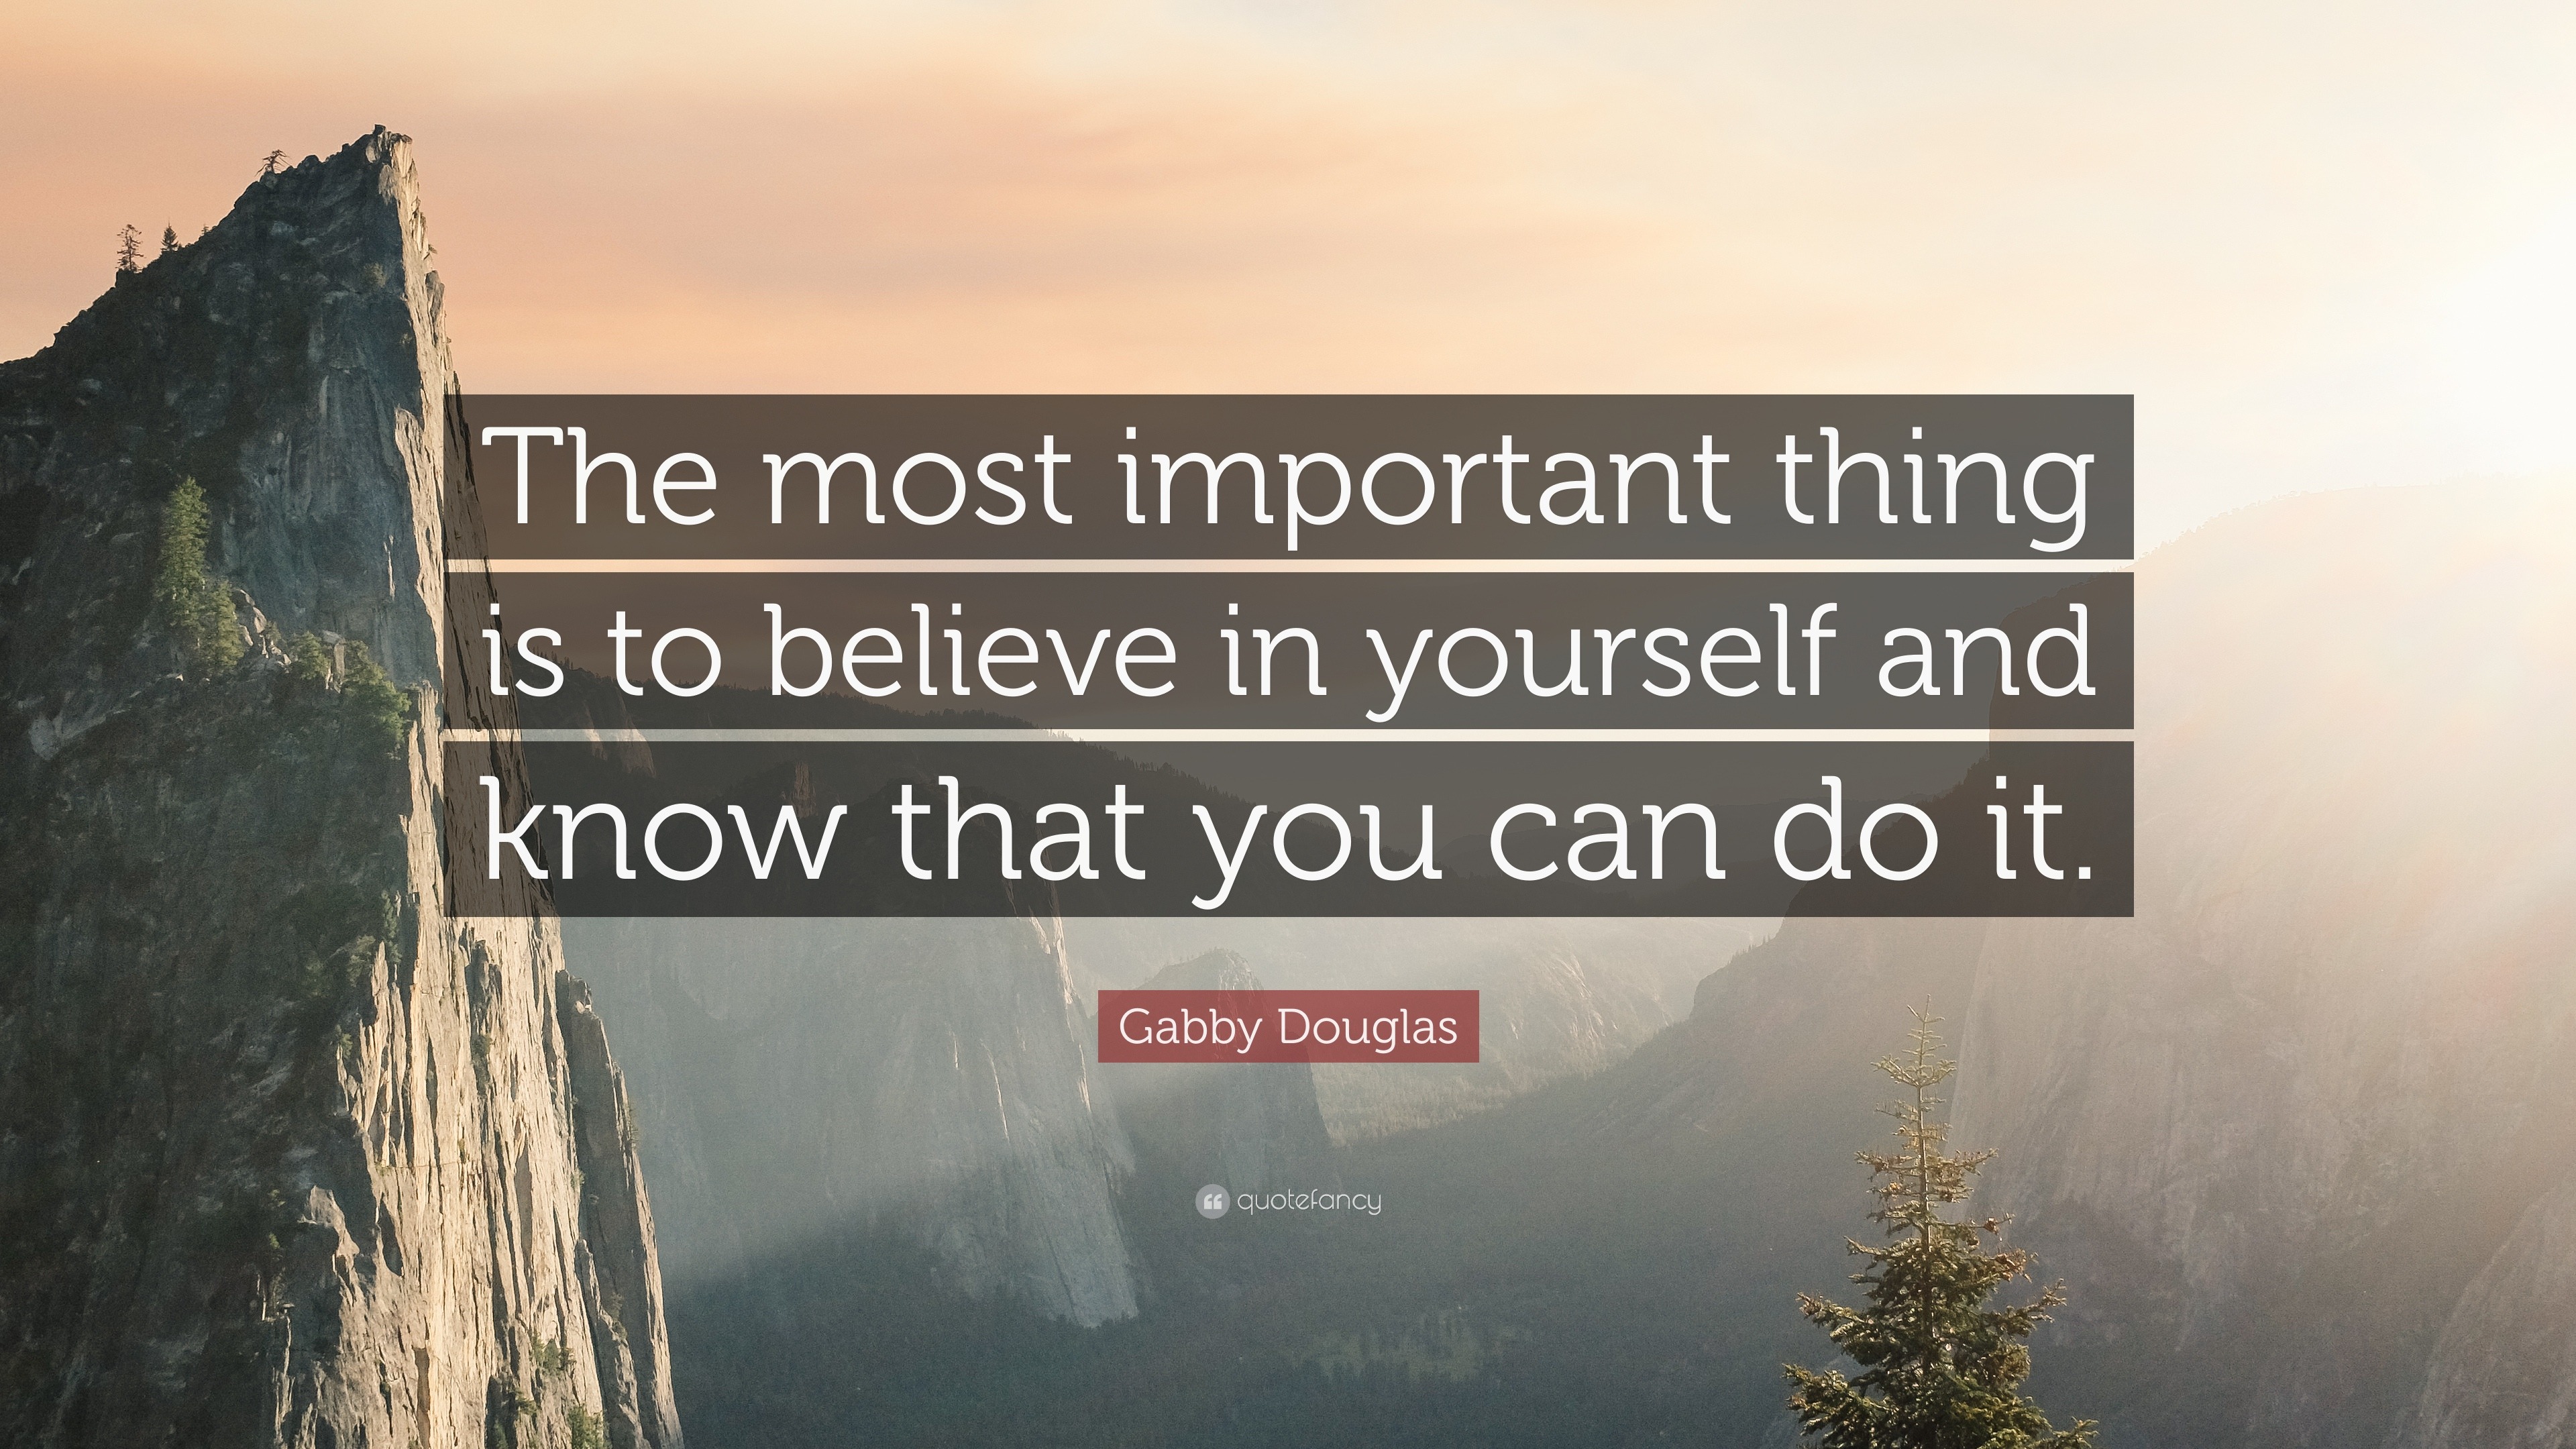 Gabby Douglas Quote: "The most important thing is to believe in yourself and know that you can ...